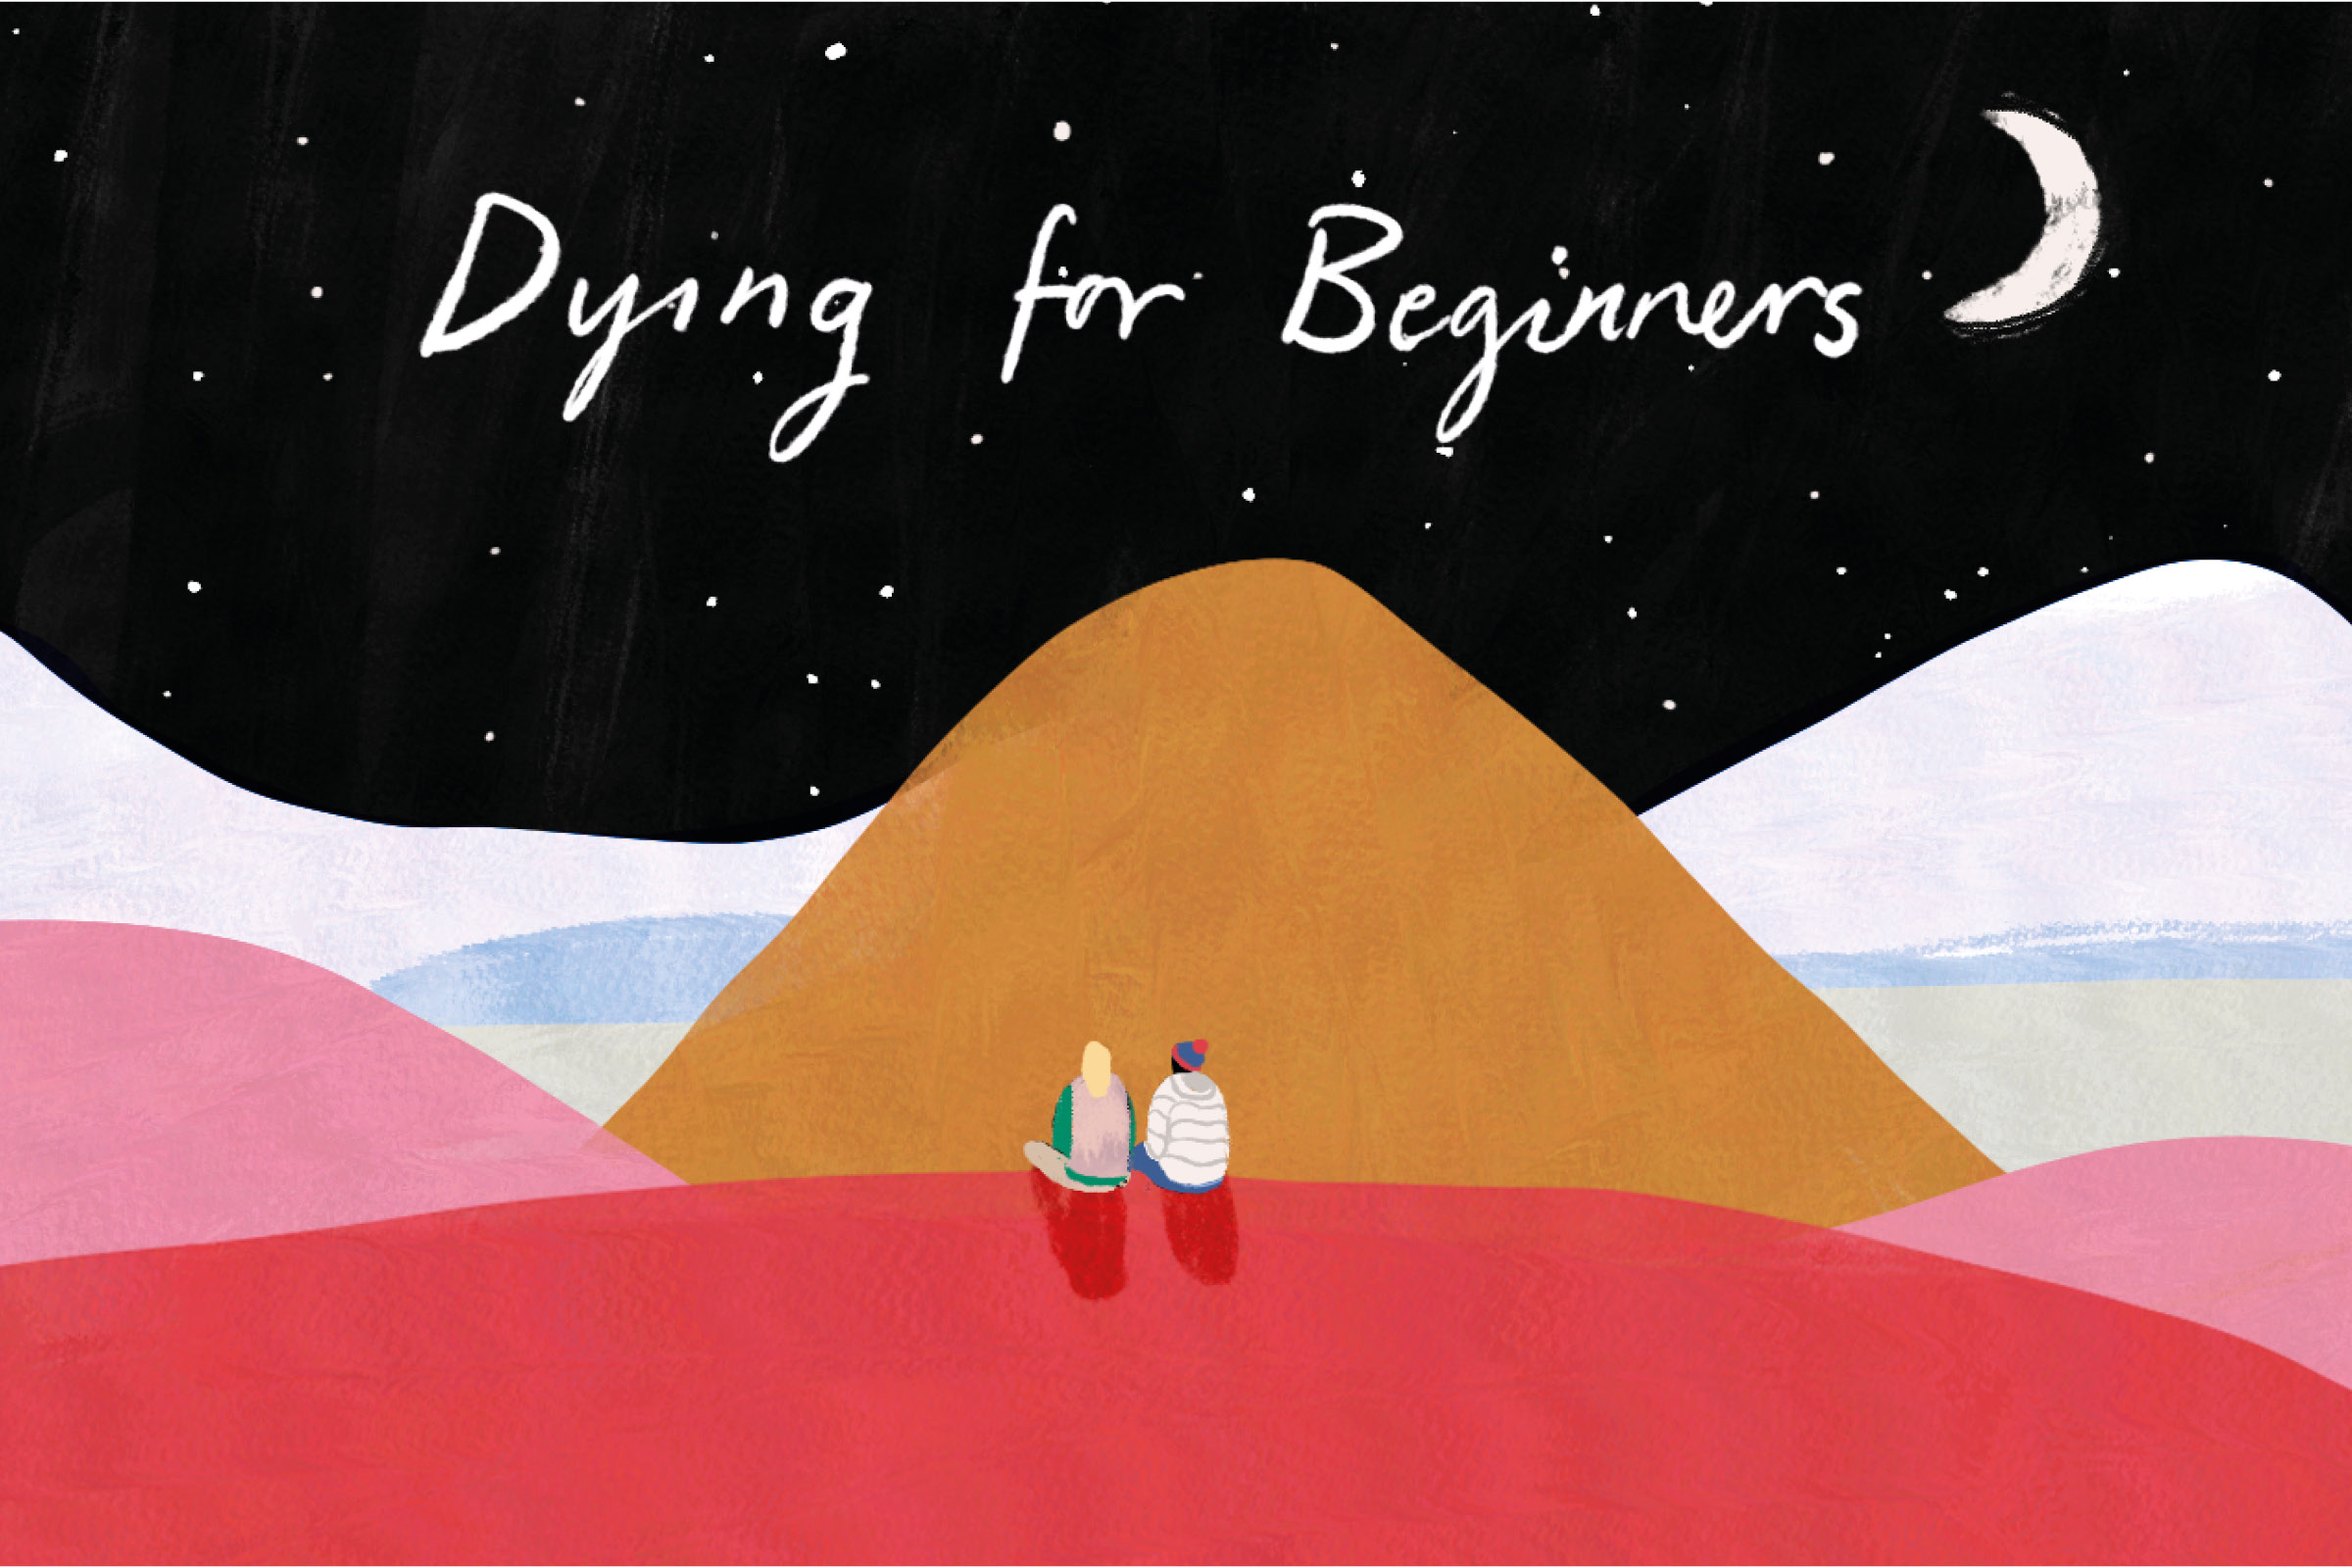 Dying for beginners